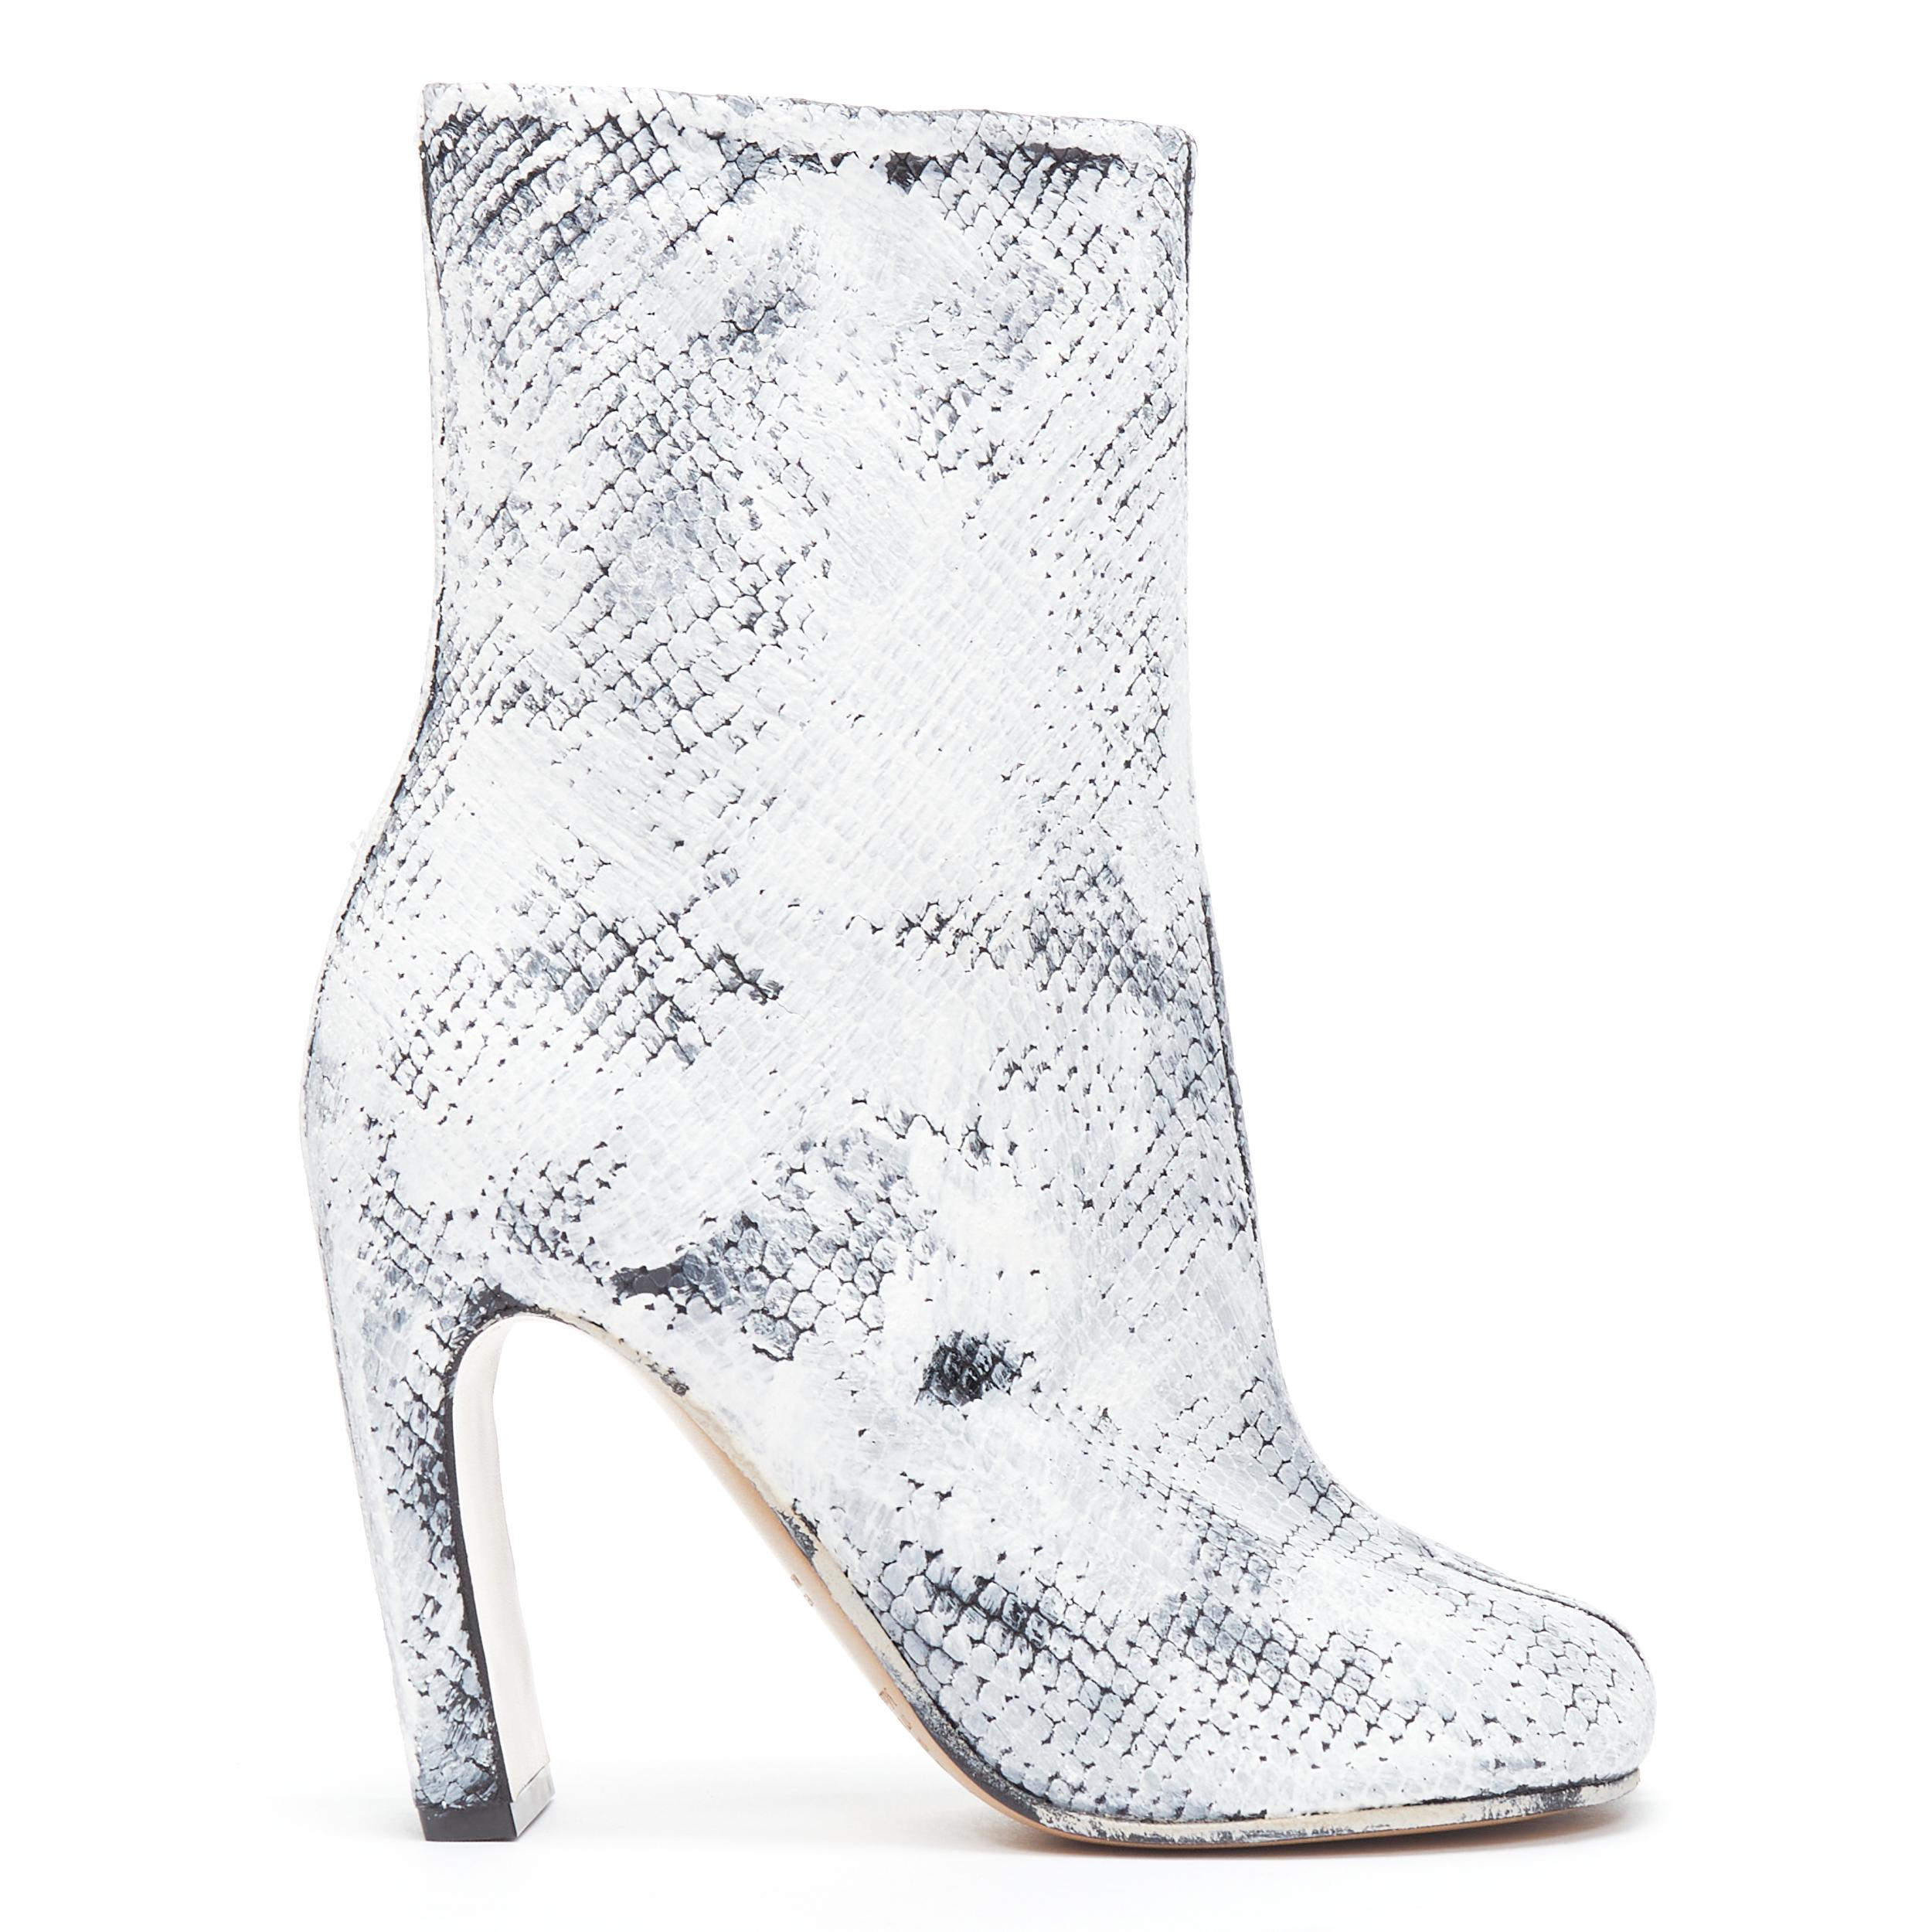 new MAISON MARGIELA Tabi white hand painted scaled split toe ankle boot EU37 
Reference: TGAS/B01299 
Brand: Maison Margiela 
Designer: John Galliano 
Material: Leather 
Color: White 
Pattern: Solid 
Closure: Zip 
Extra Detail: Hand painted on